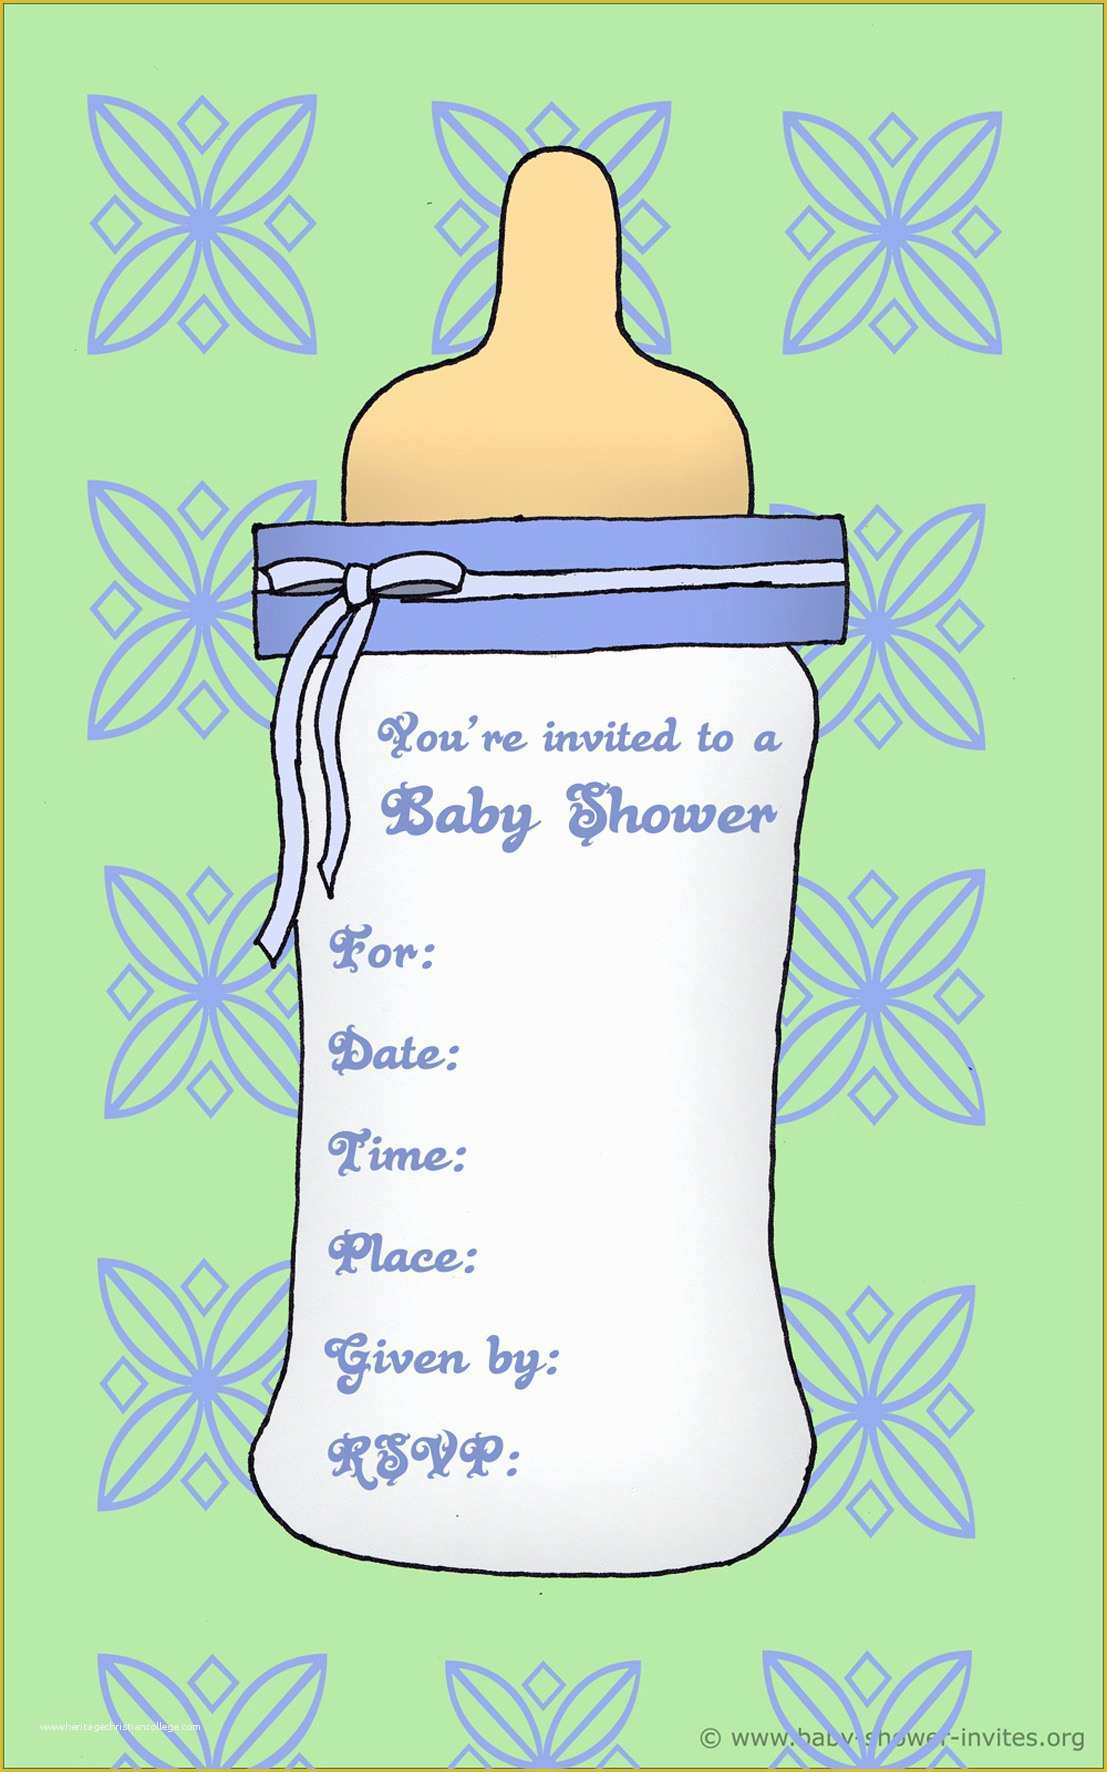 Baby Shower Card Template Free Of Free Printable Baby Shower Cards Templates